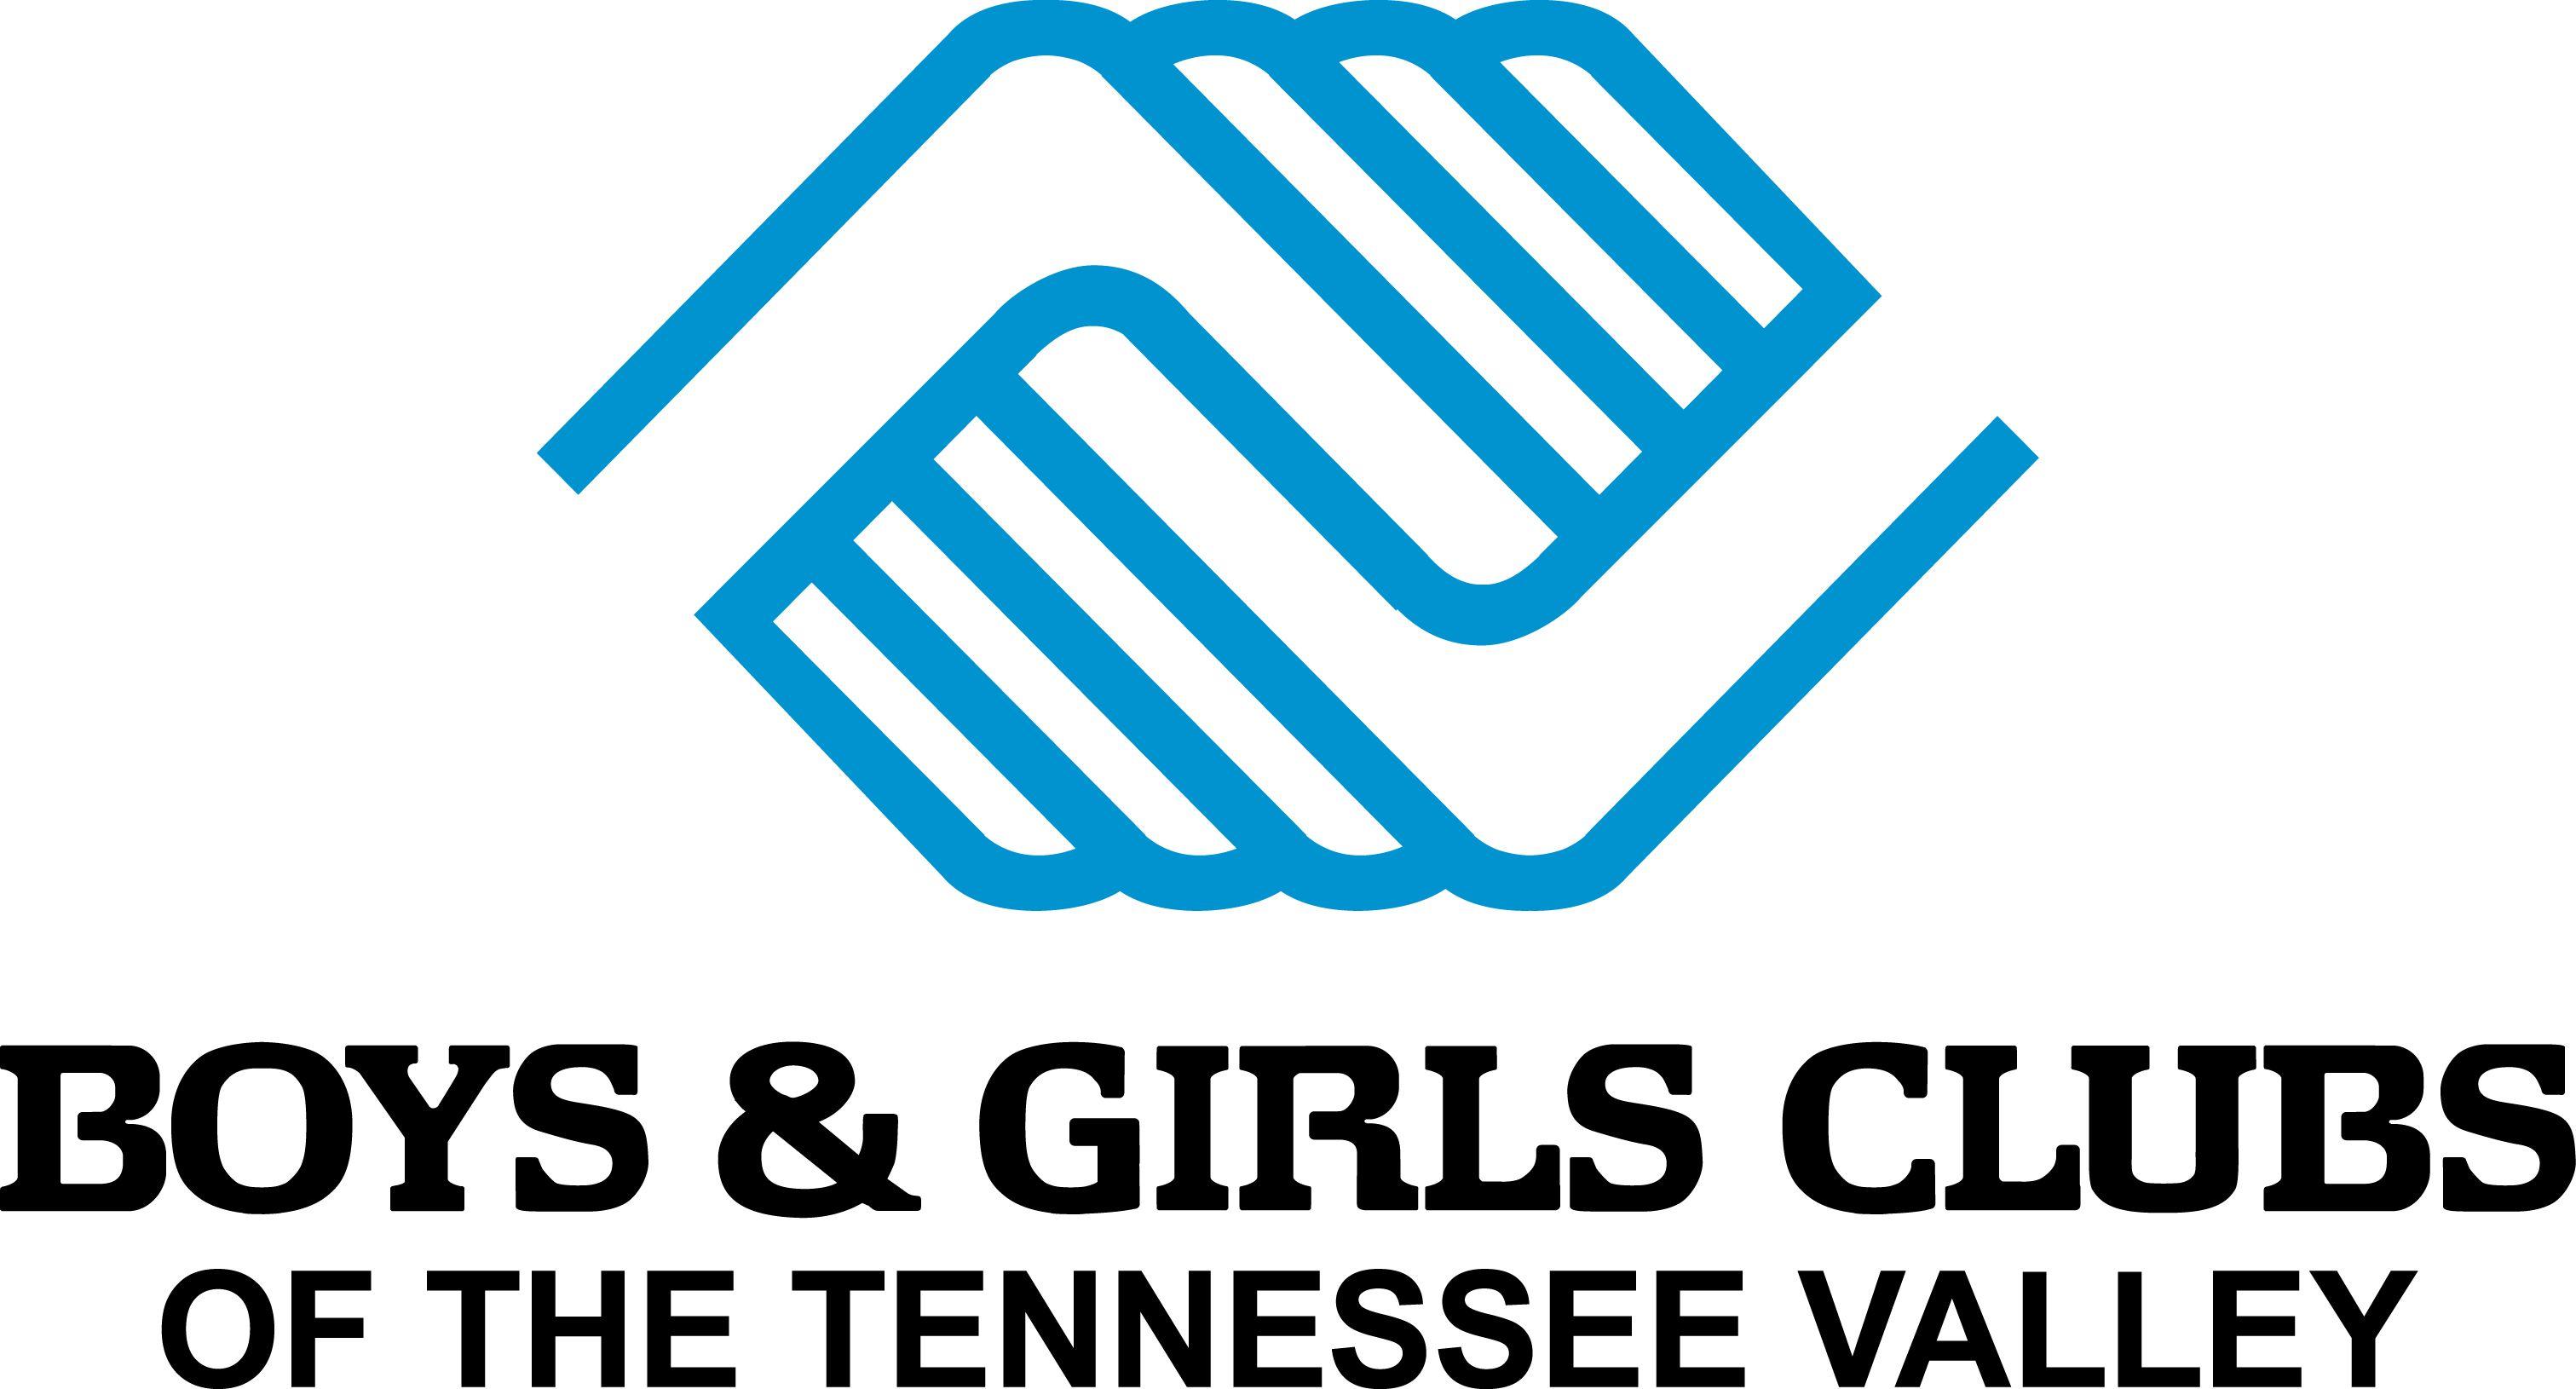 Boys and Girls Club Logo - BOYS & GIRLS CLUBS OF THE TENNESSEE VALLEY ANNOUNCES 'OUR KIDS, OUR